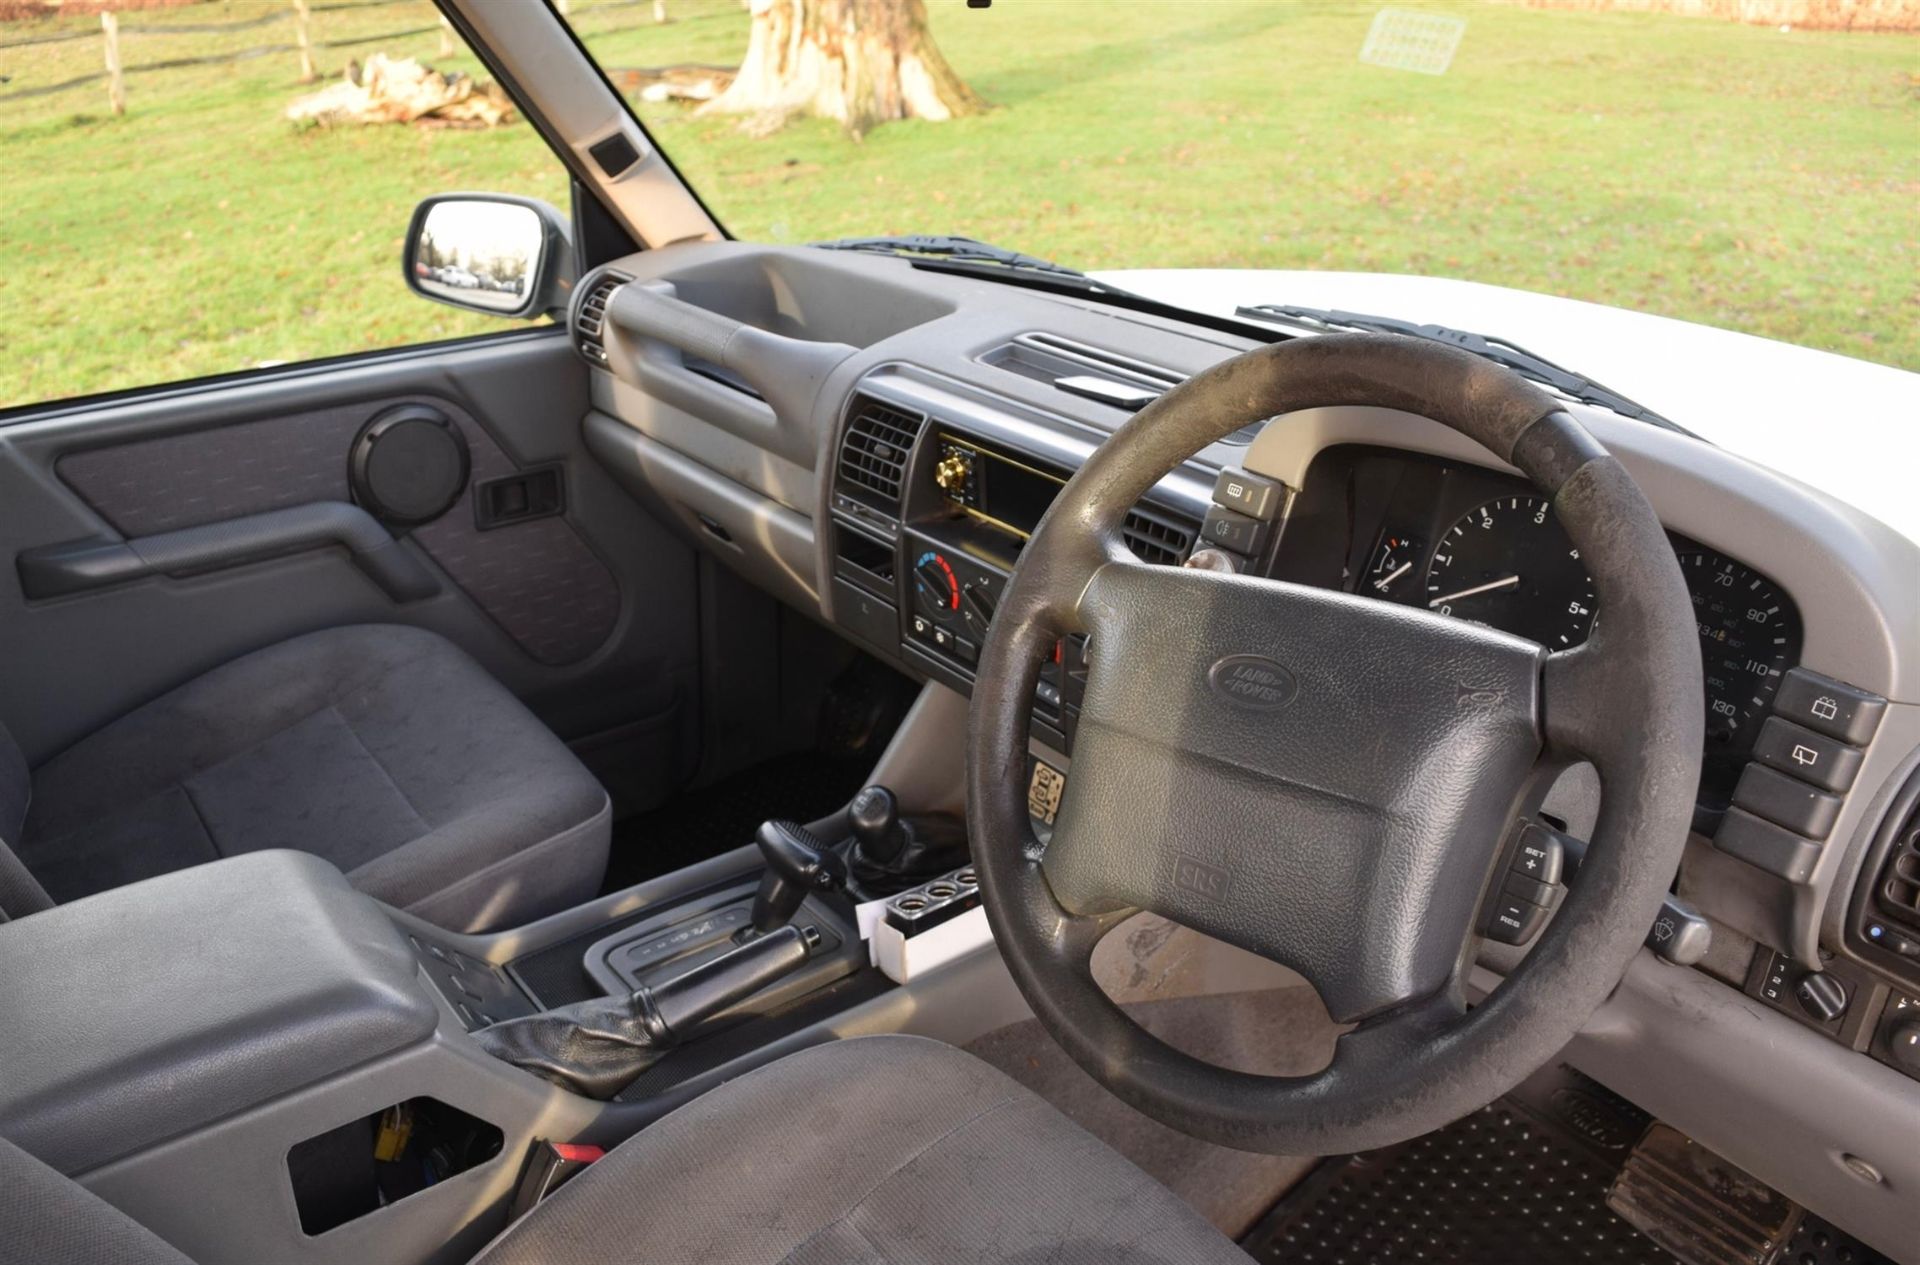 1998 Land Rover Discovery 2-Door R41 KAA. 2-door Land Rover Discovery 300 TDI, which was first - Image 18 of 41